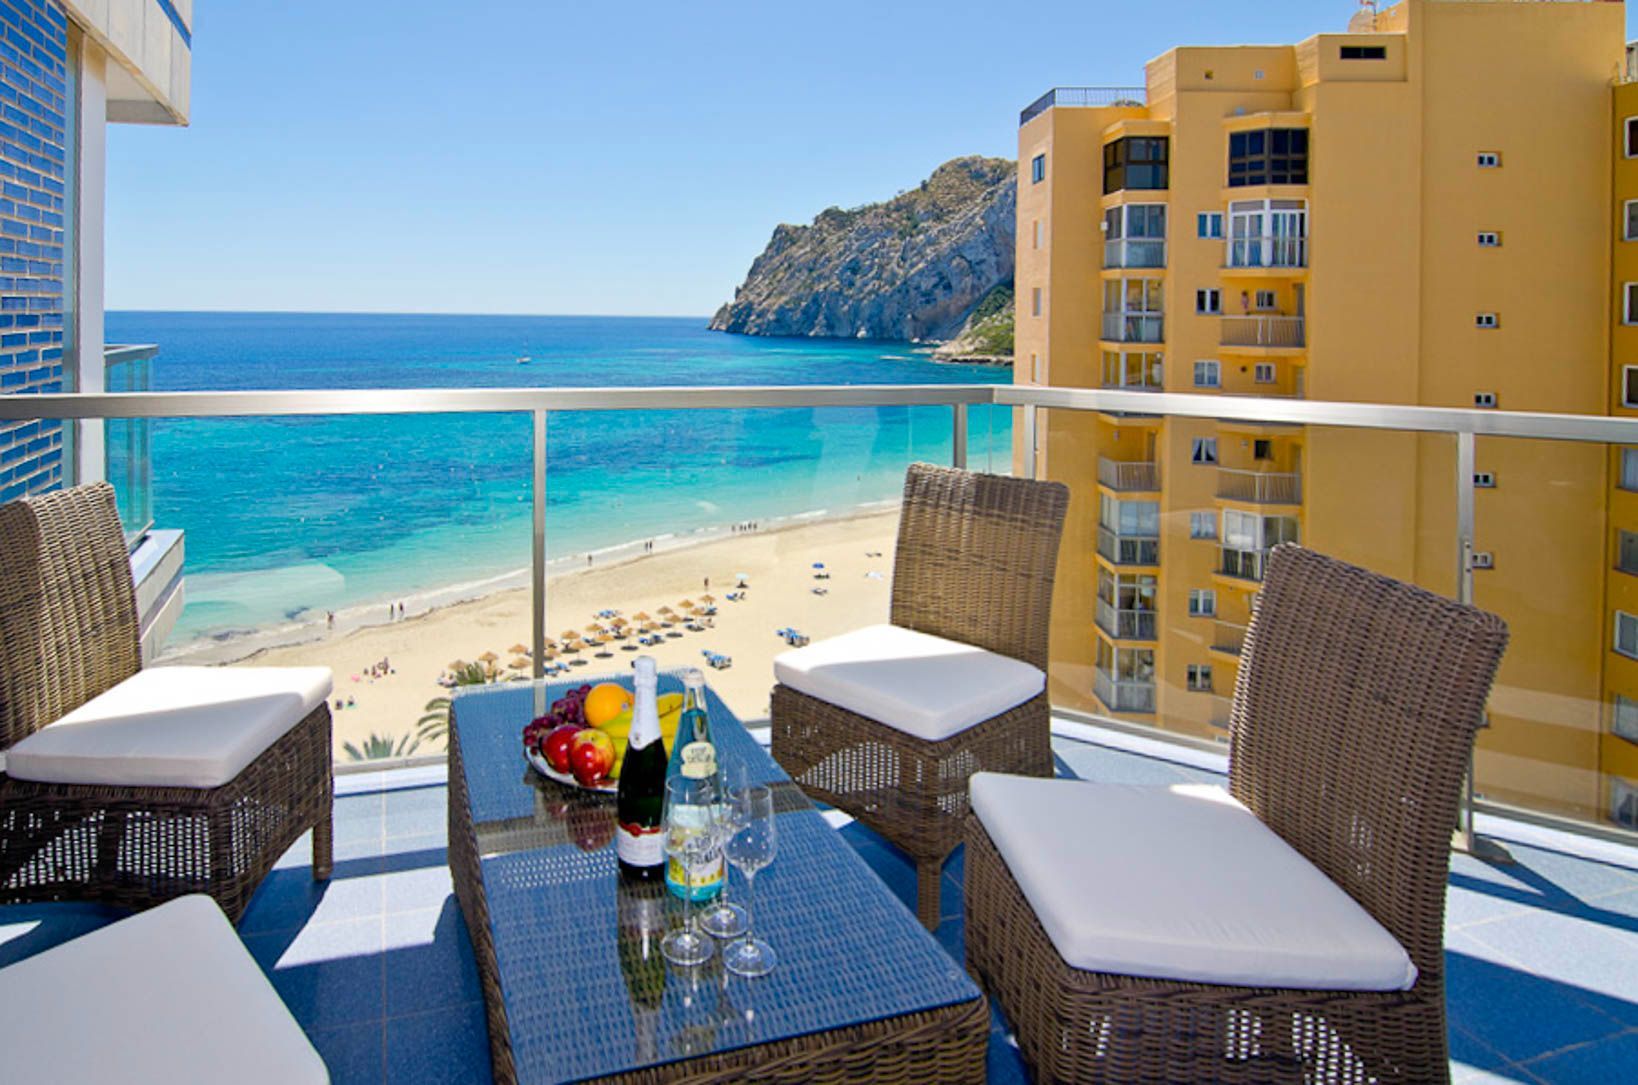 Penthouse - duplex on the first line of the beach with open views to the sea and the Peñon de Ifach